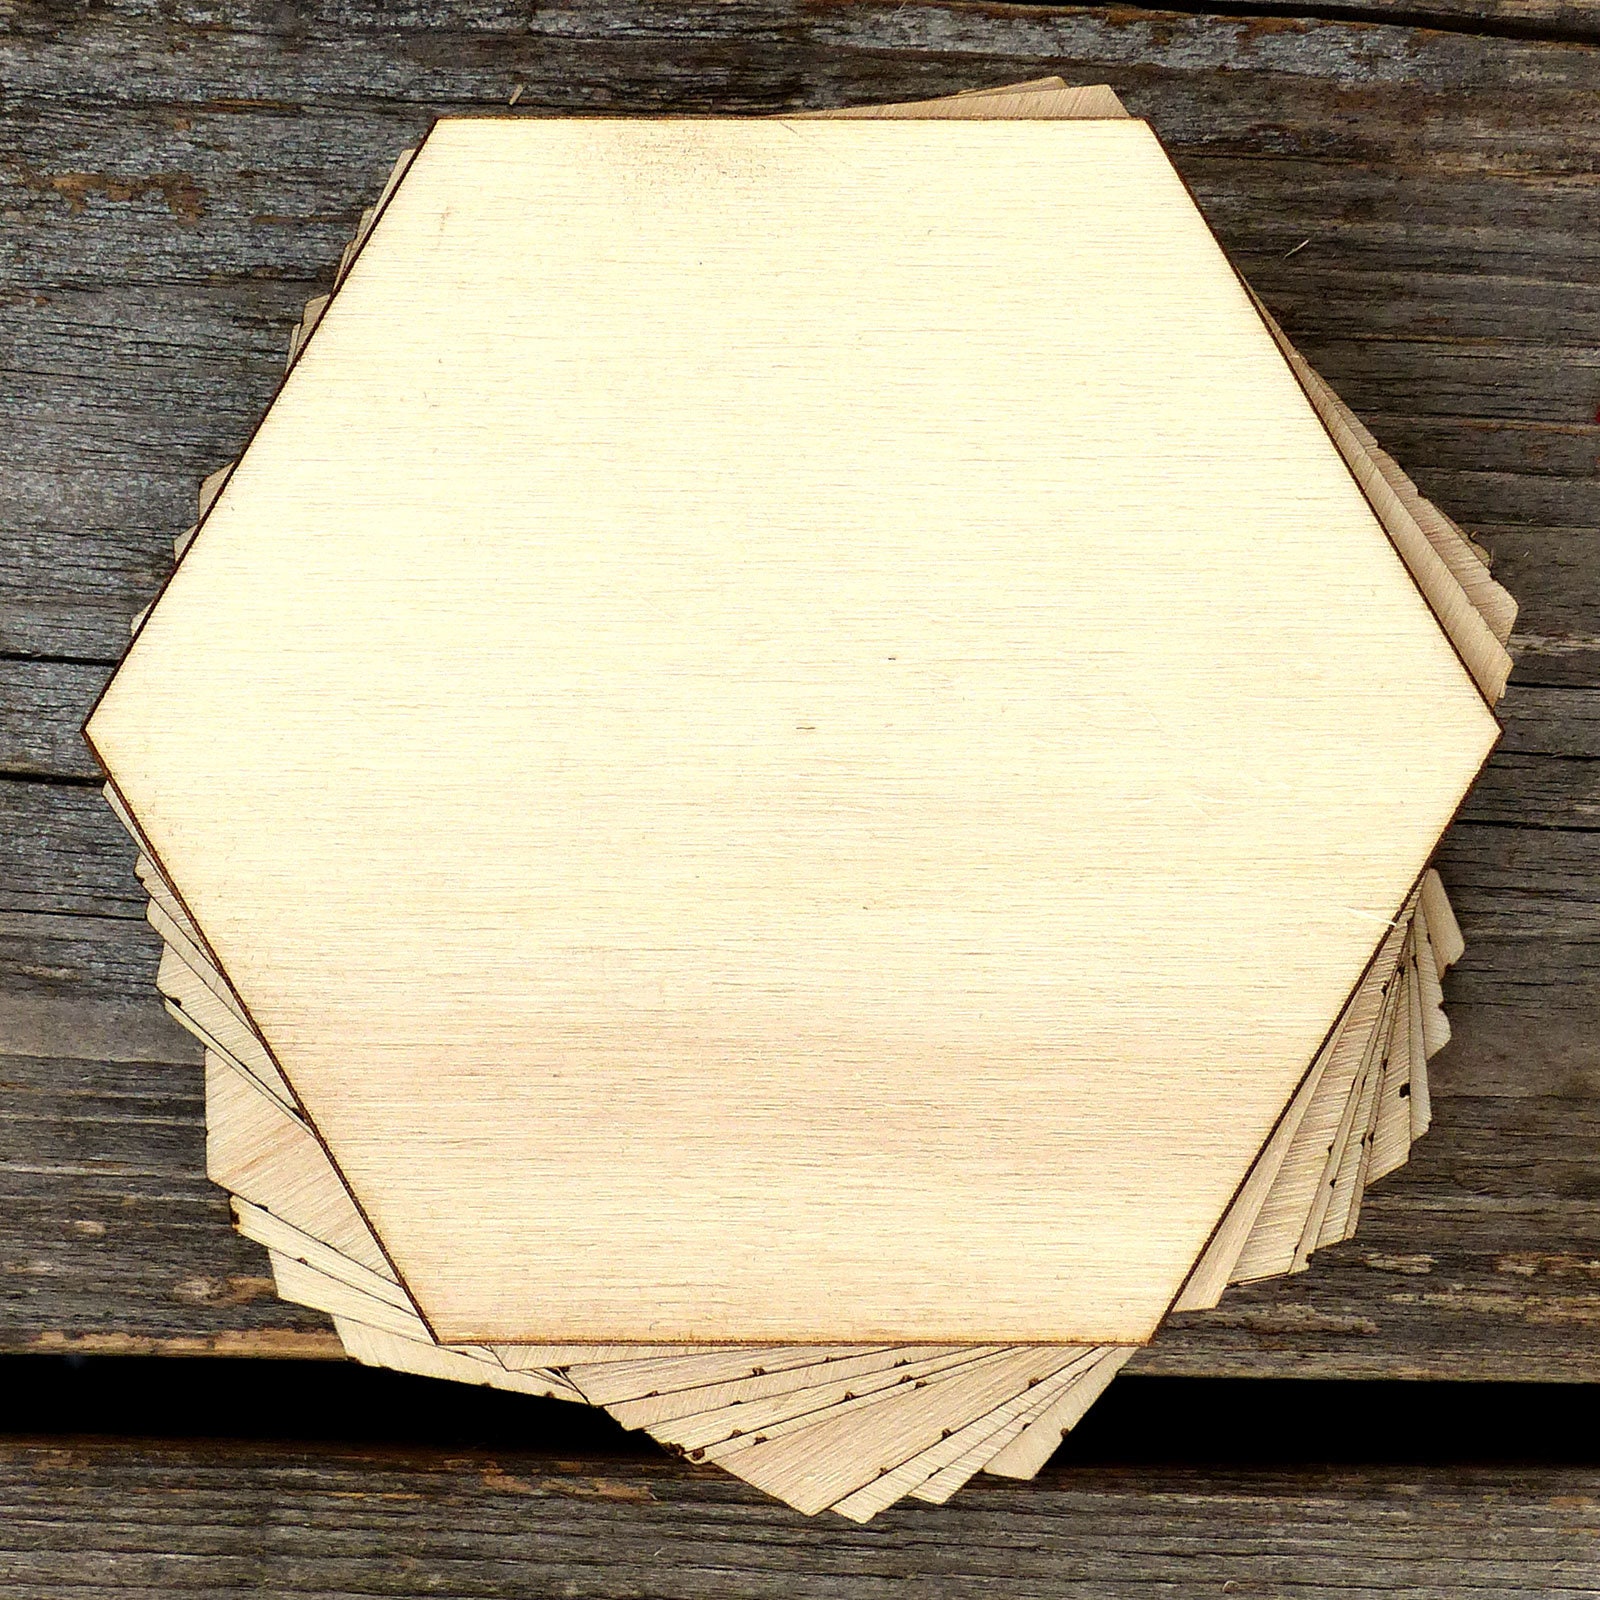 100PCS Hexagon Wood Pieces Unfinished Wood Hexagon Pieces 1.5x1.3x0.2 Inch  Na